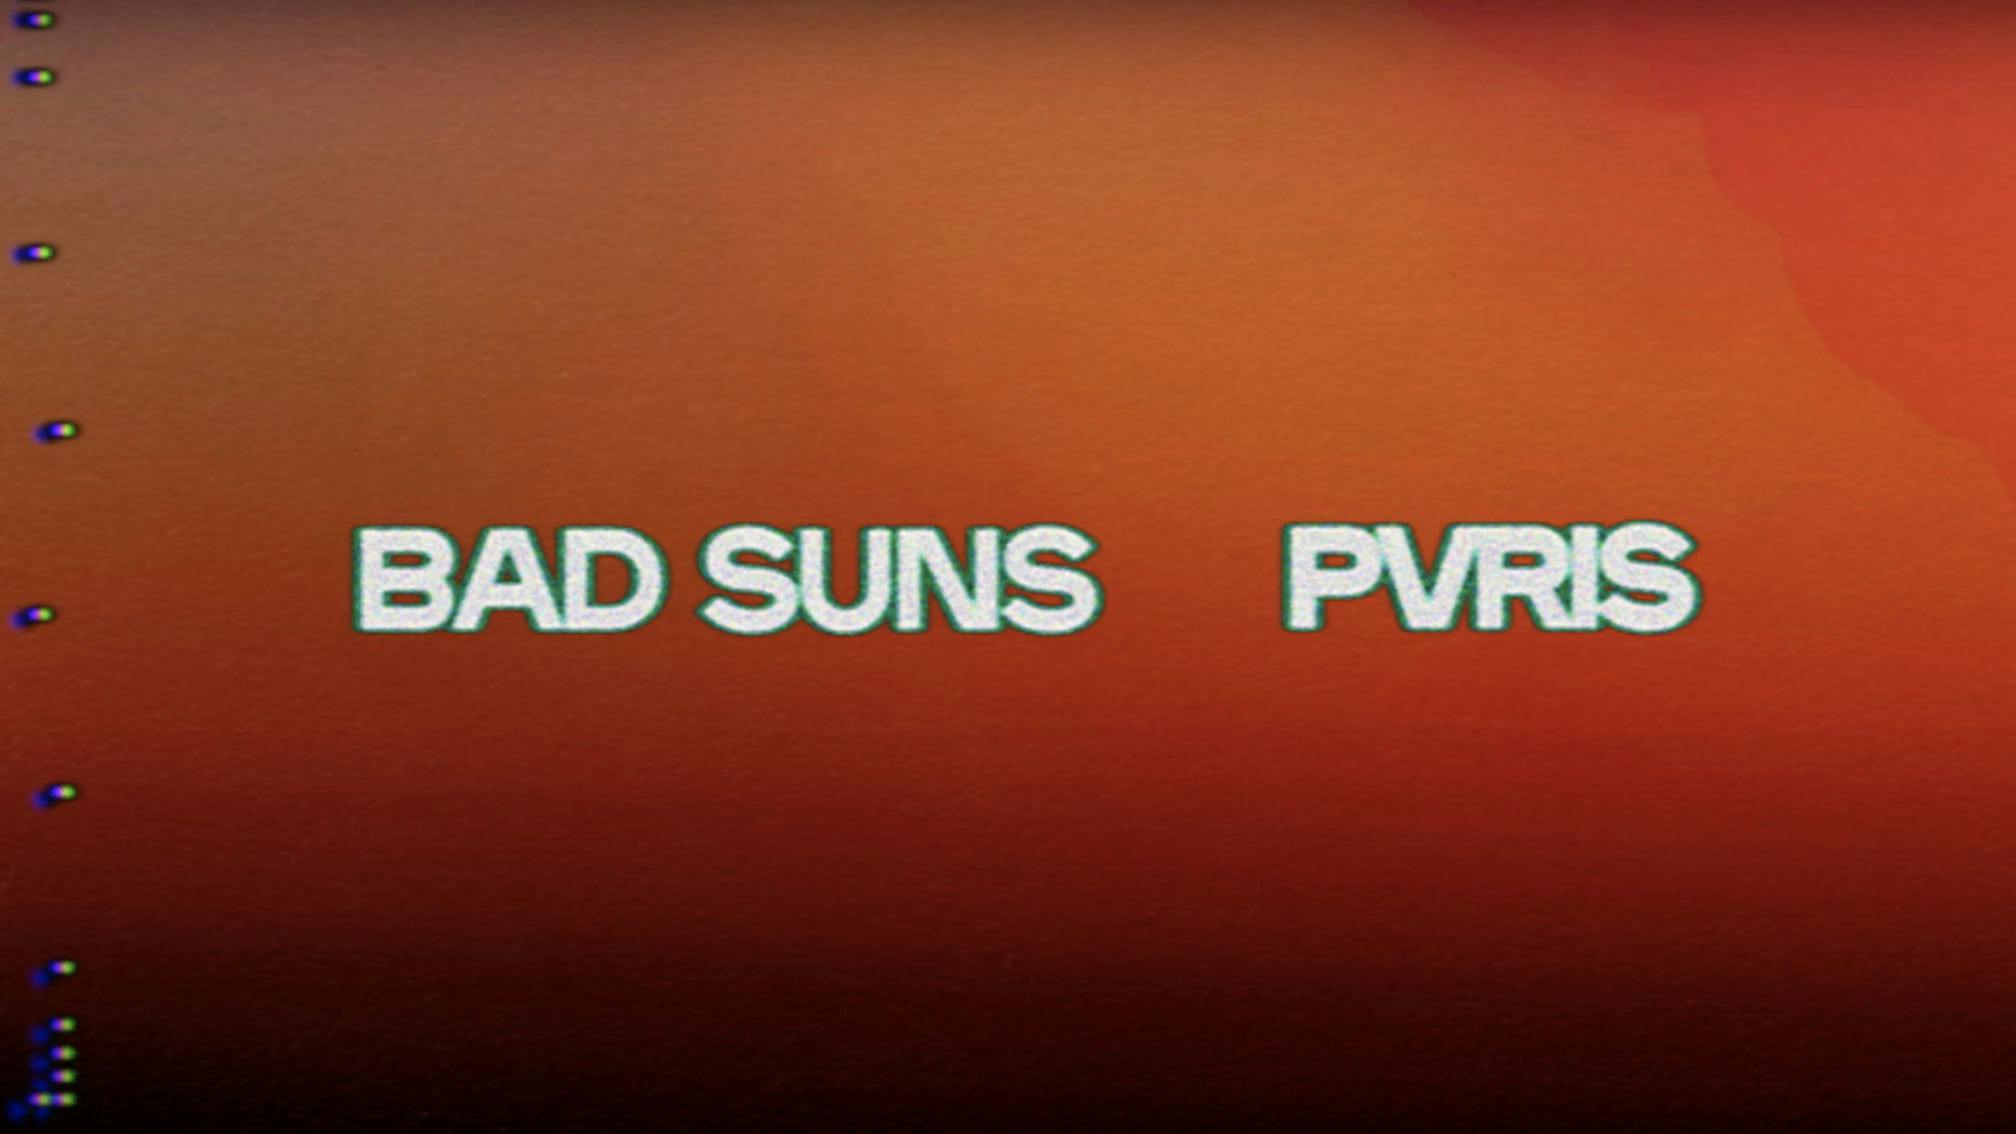 Listen: Bad Suns and PVRIS team up for “the perfect happy and sad summer bop”